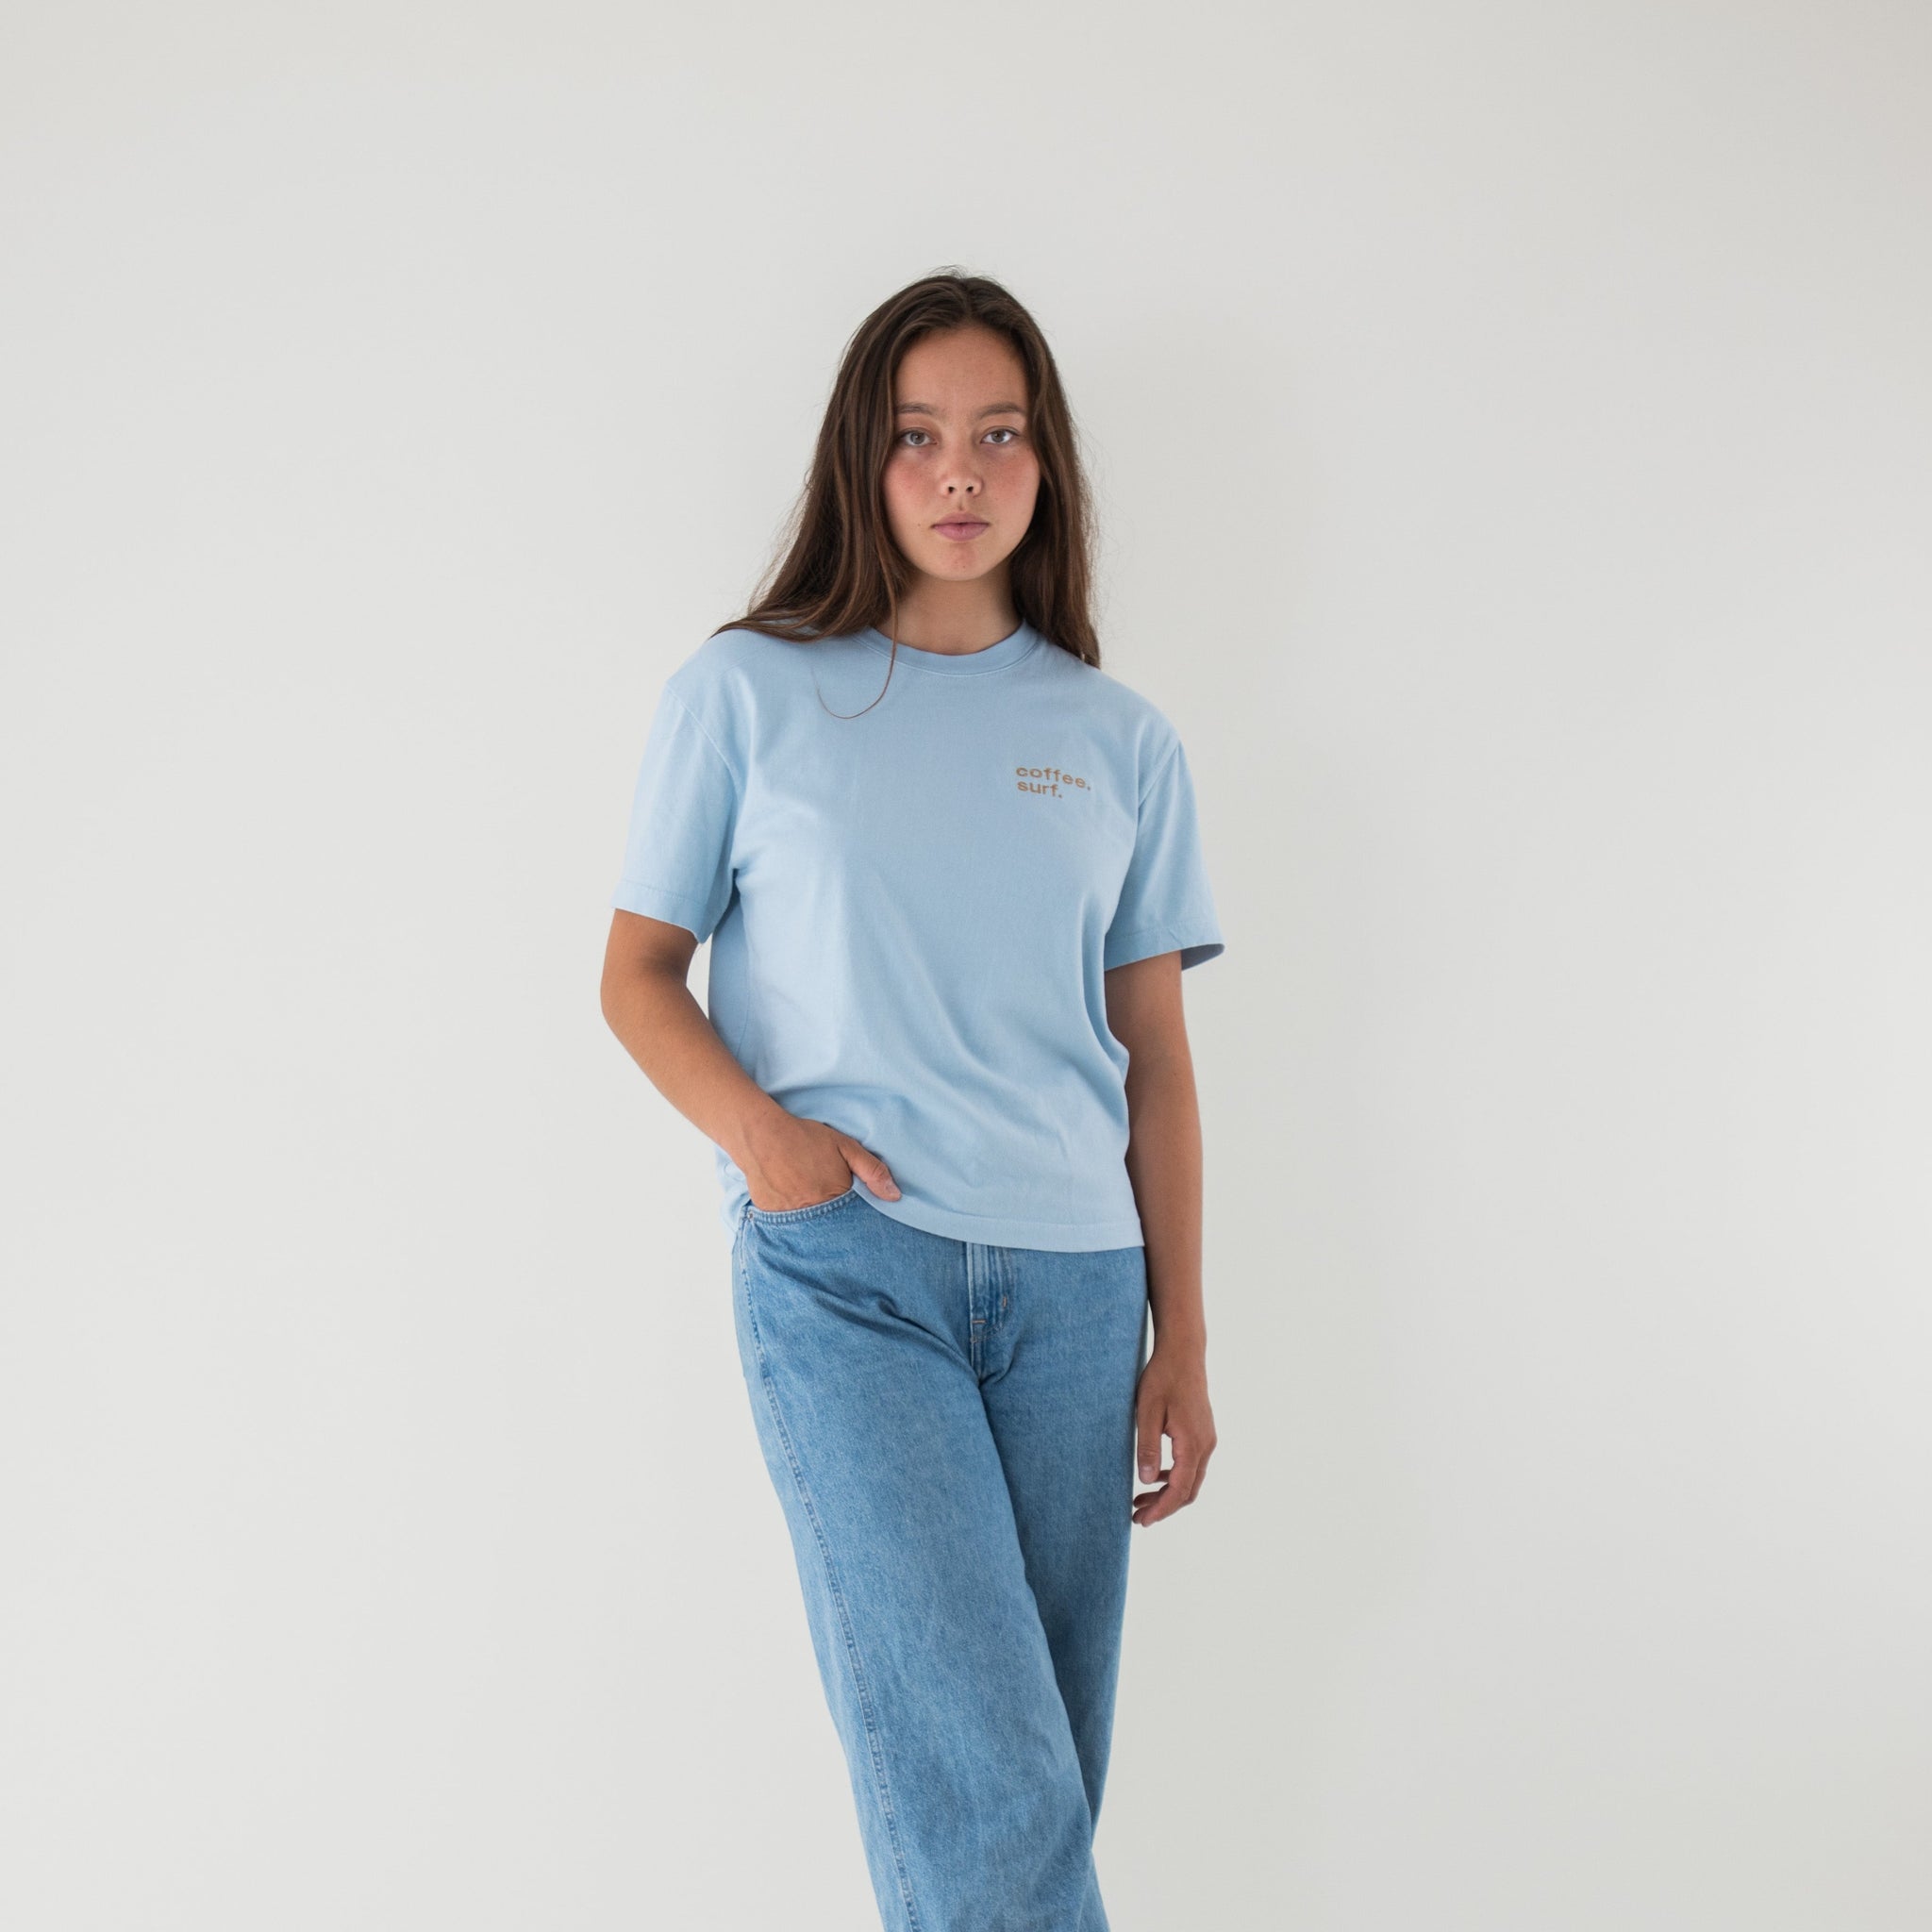 Organic cotton t-shirt in a creamy blue with "coffee. surf." embroidery over the left chest.